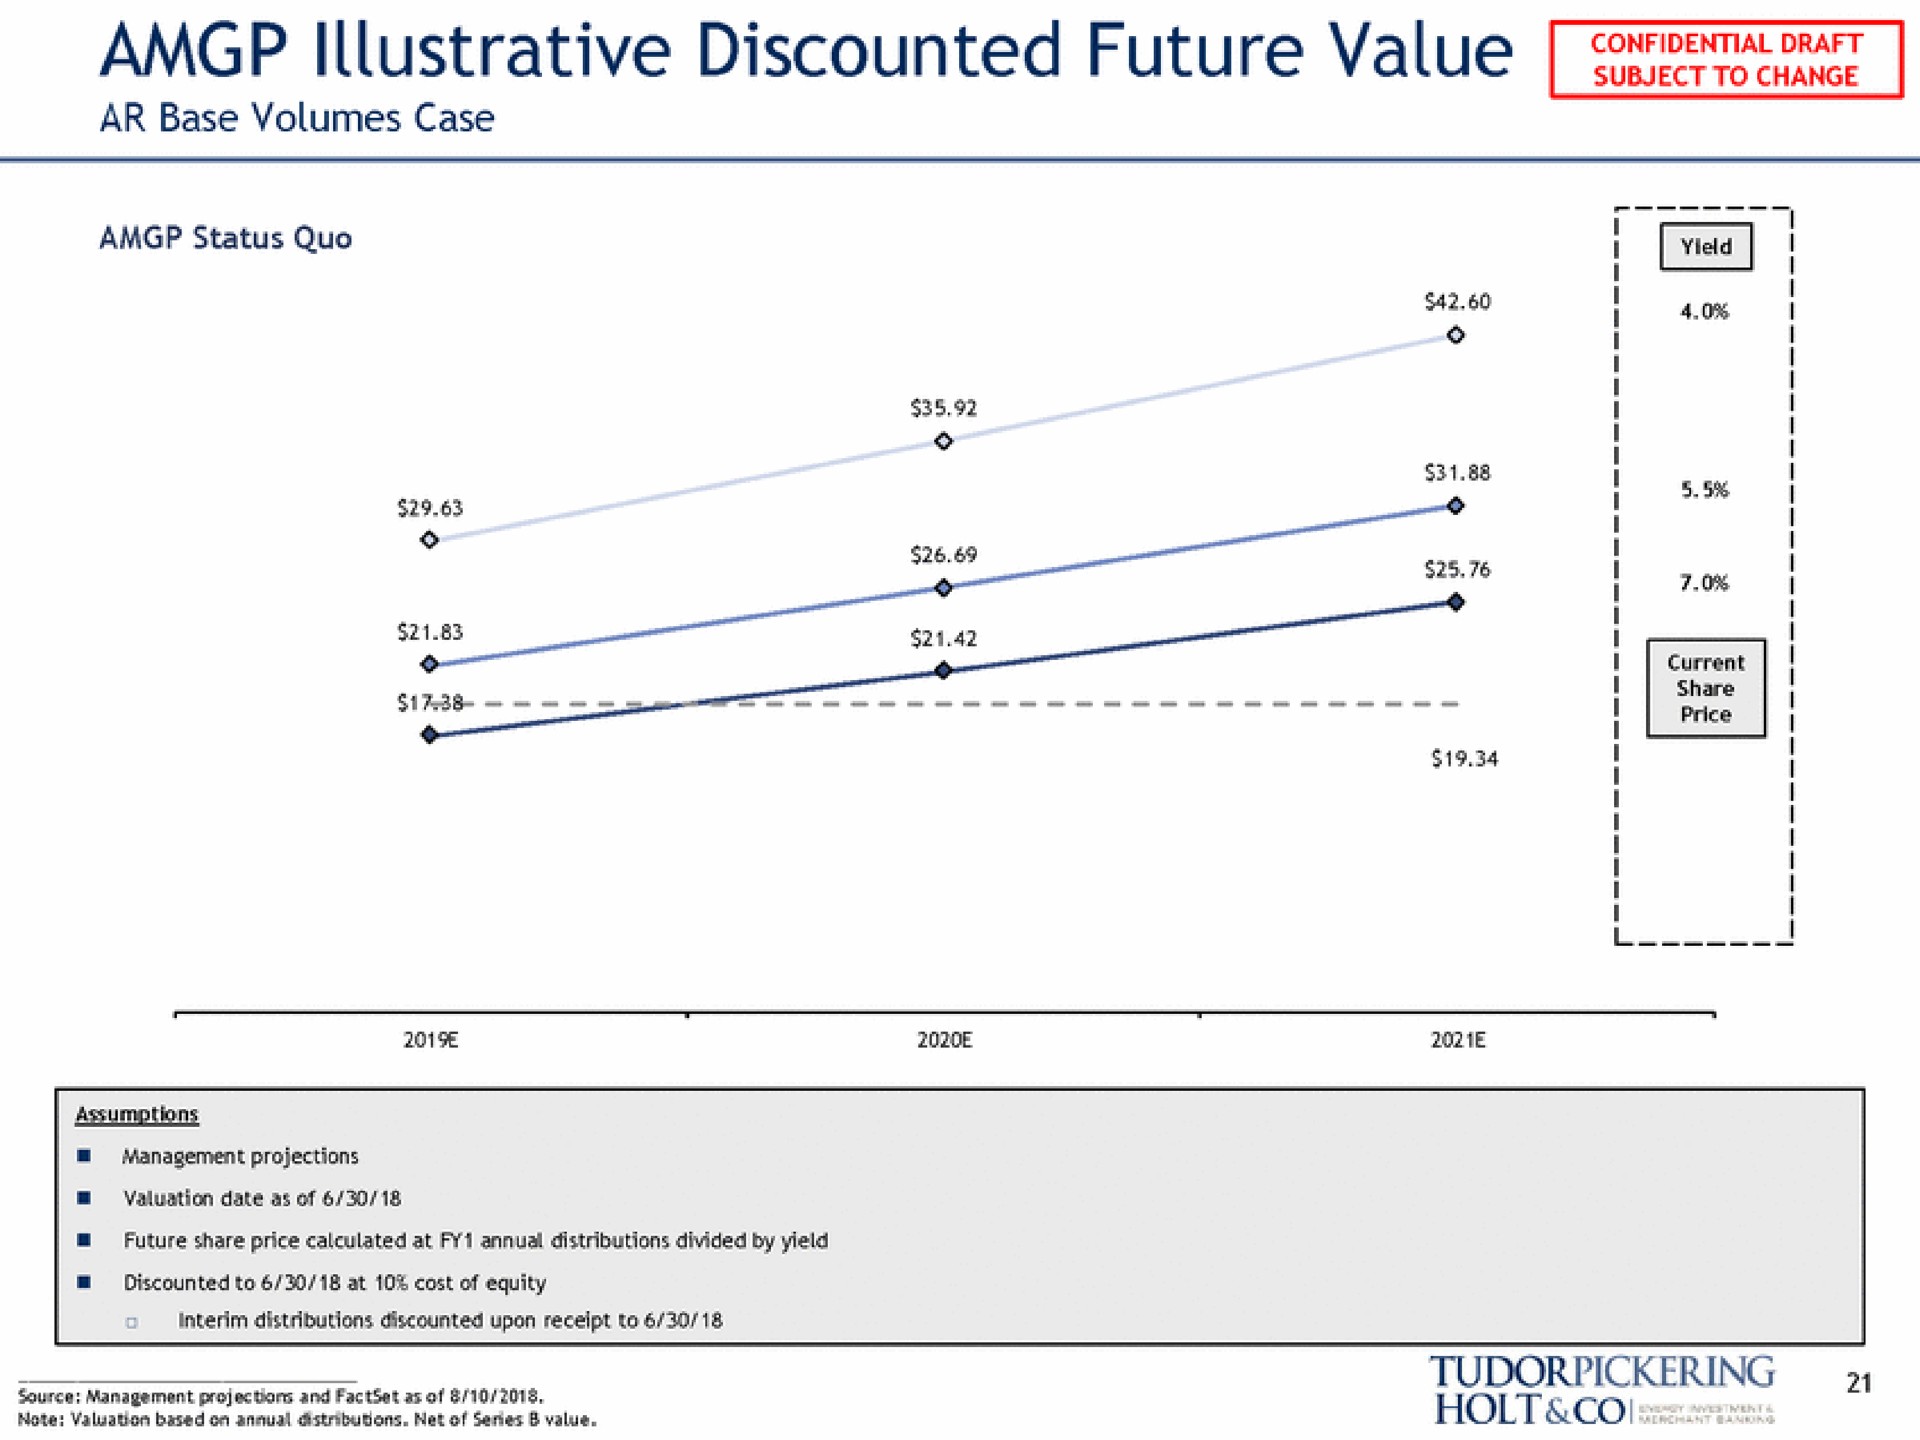 illustrative discounted future value source management and | Tudor, Pickering, Holt & Co